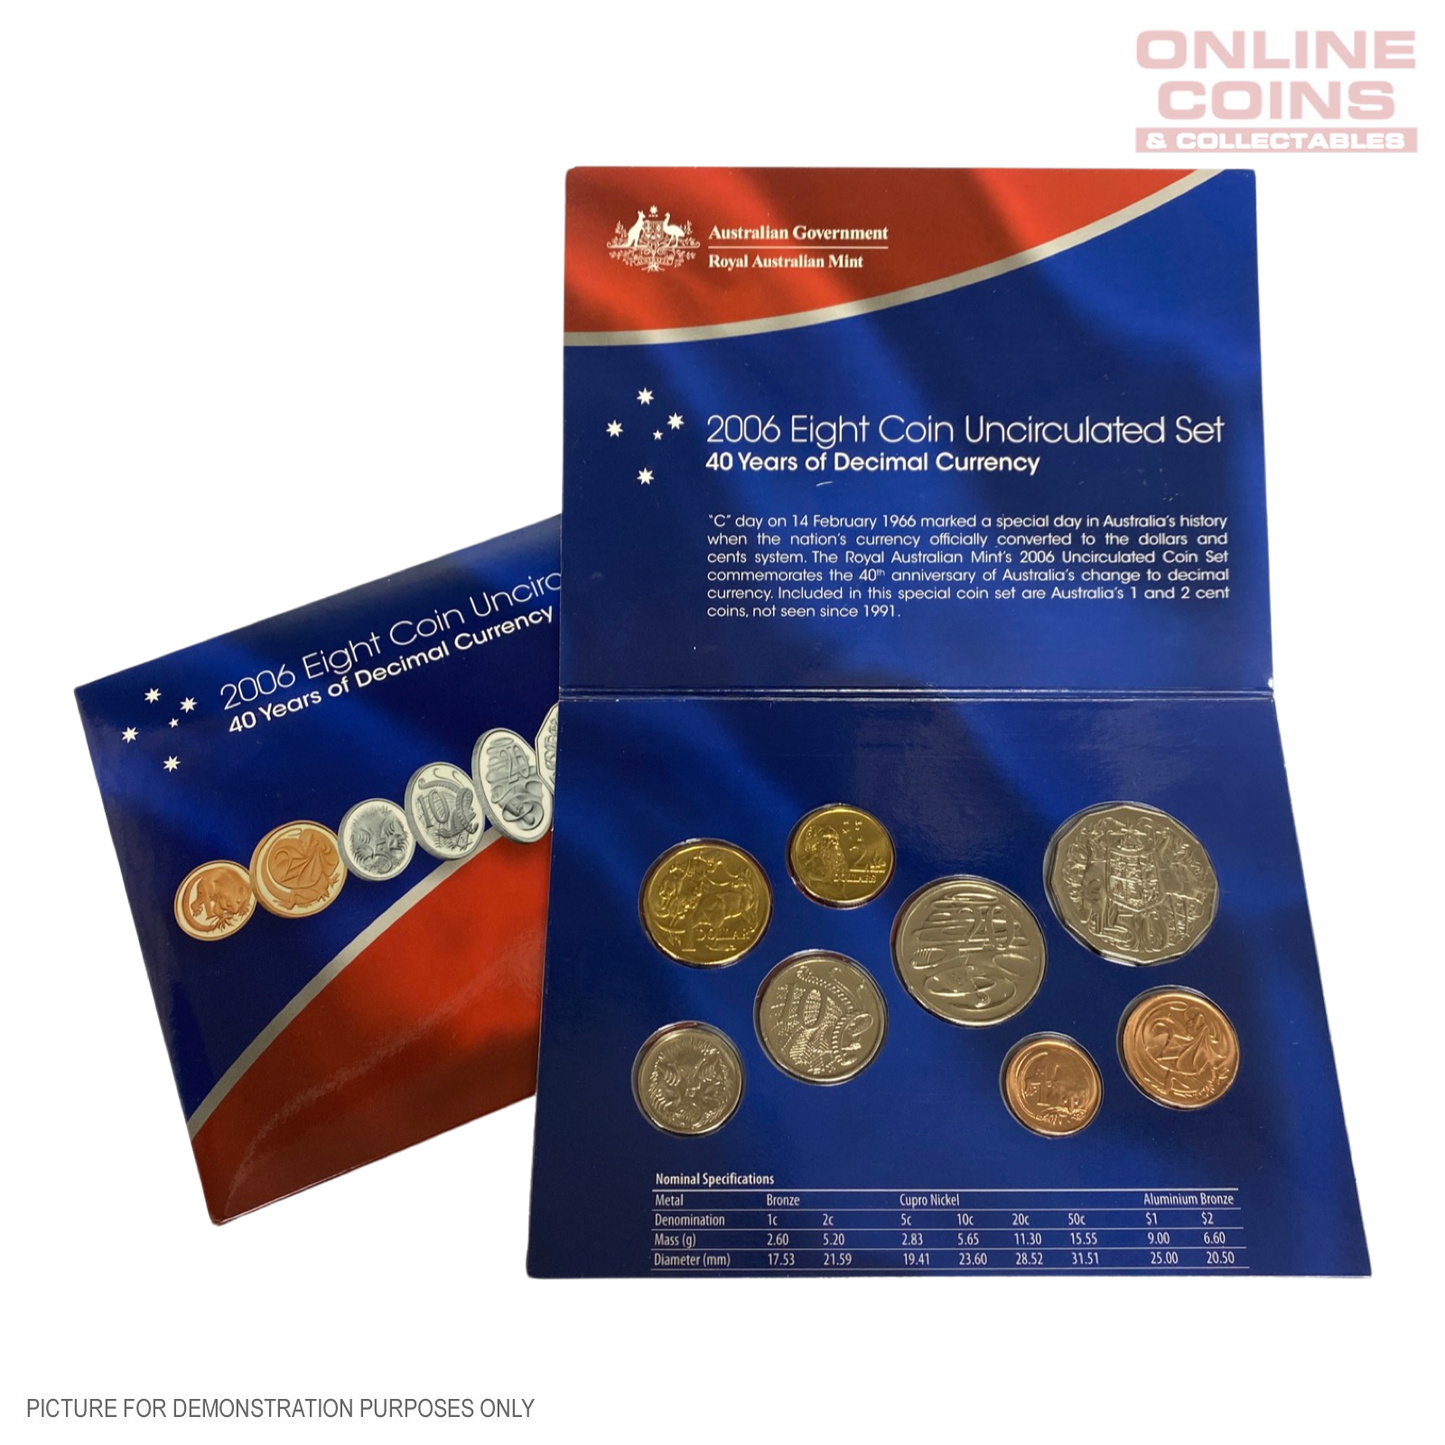 2006 Uncirculated Coin Year Set - 40 Years of Decimal Currency